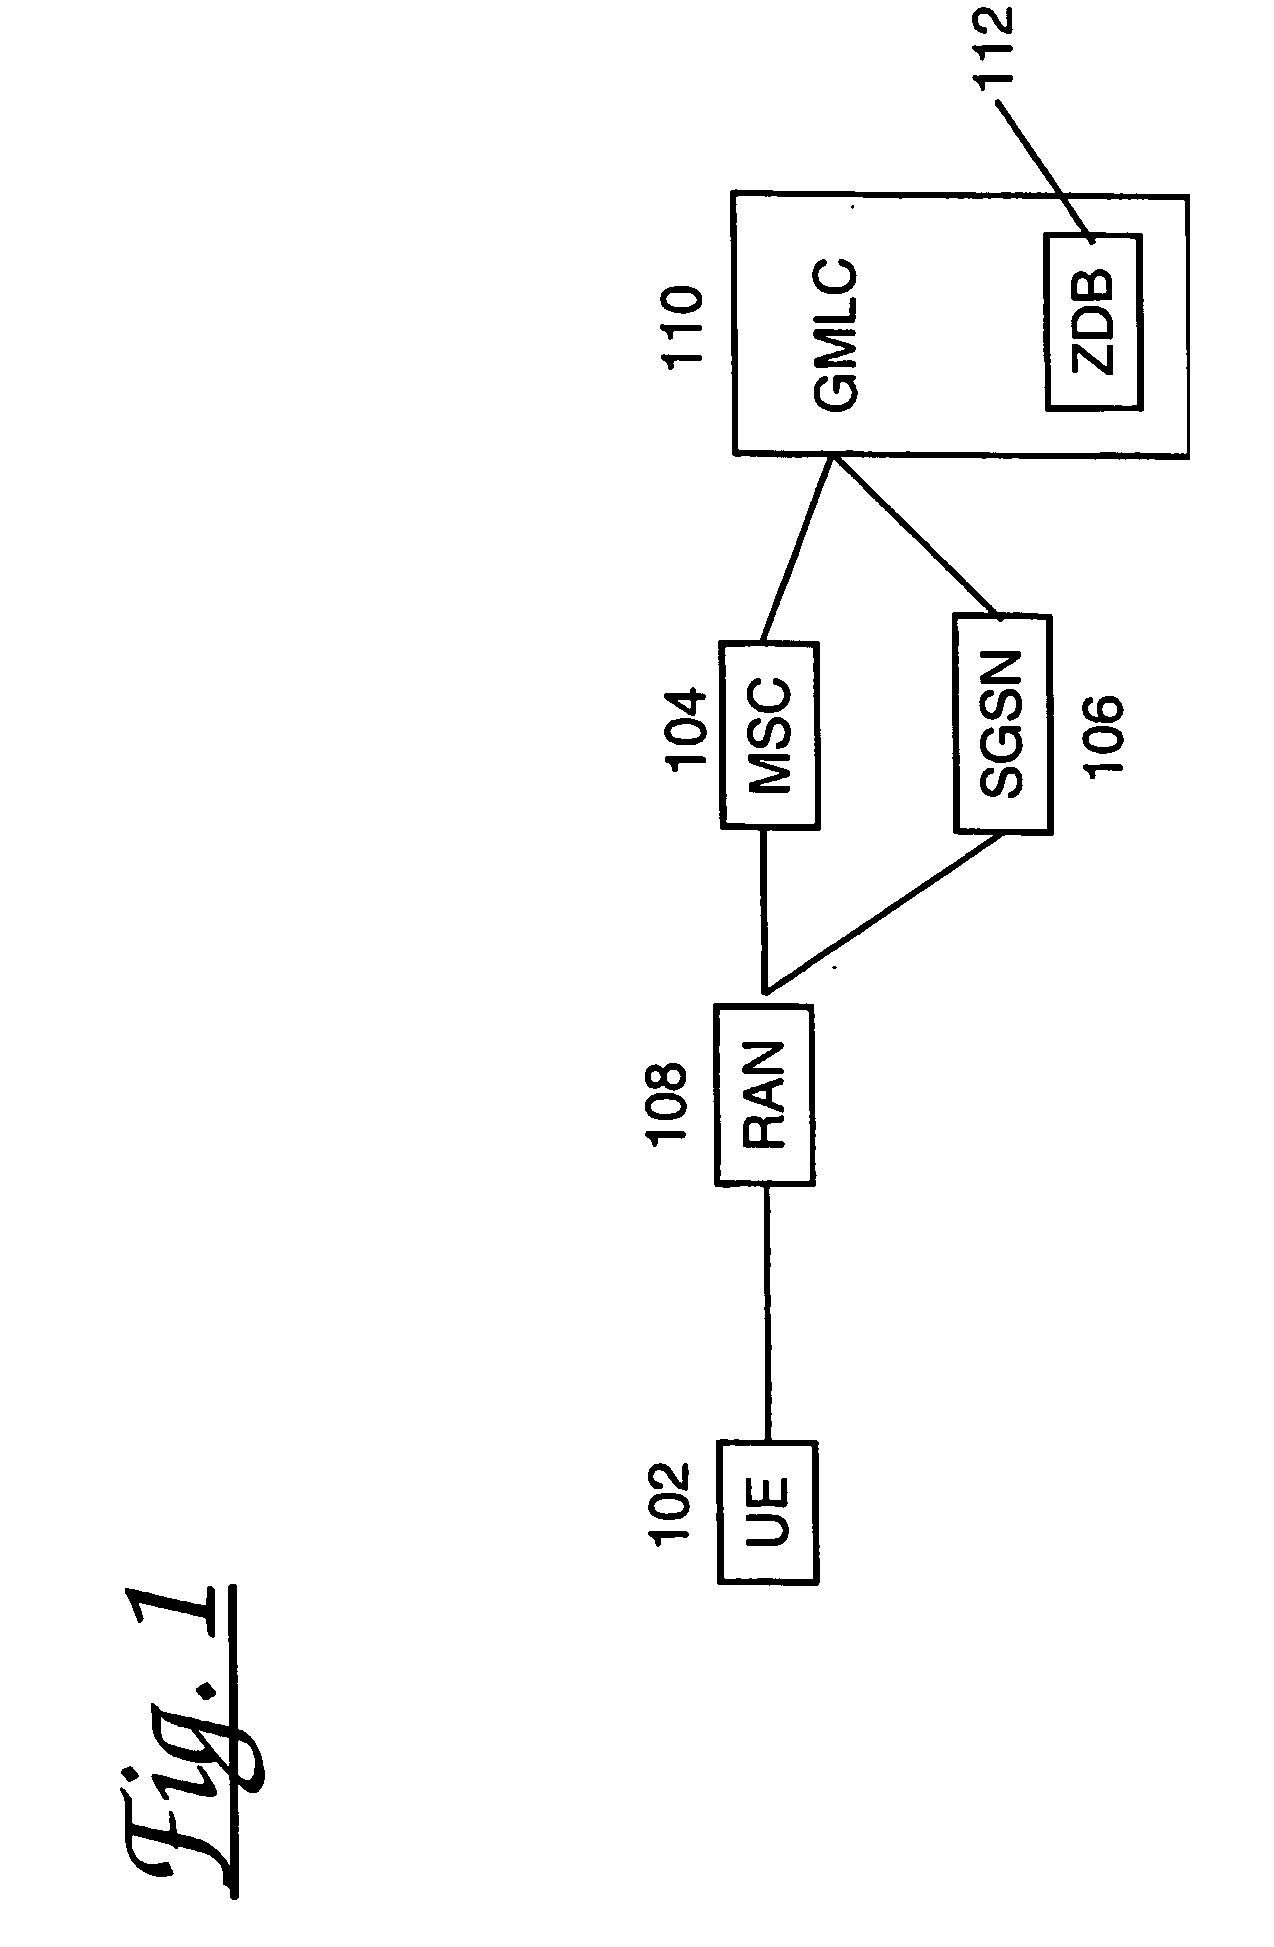 Method of call routing